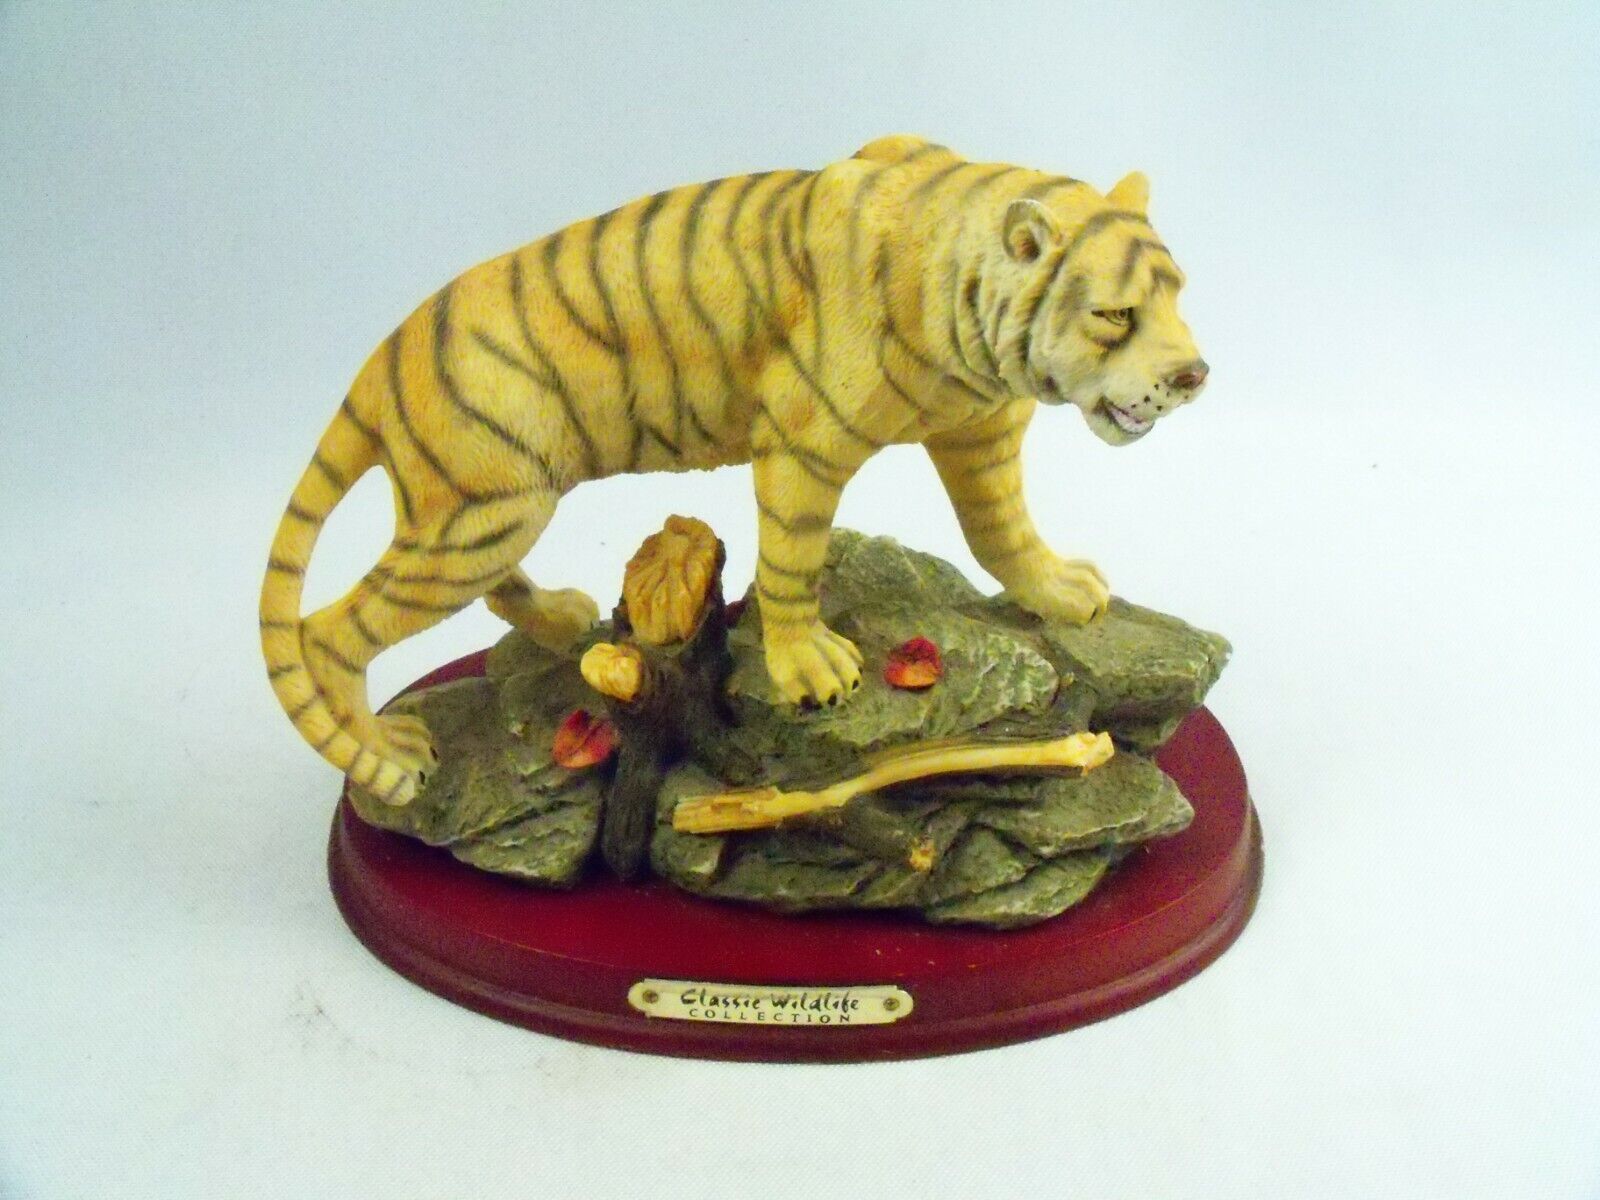 Classic Wildlife Collection Tiger Resin Statue Figurine on Wood Base